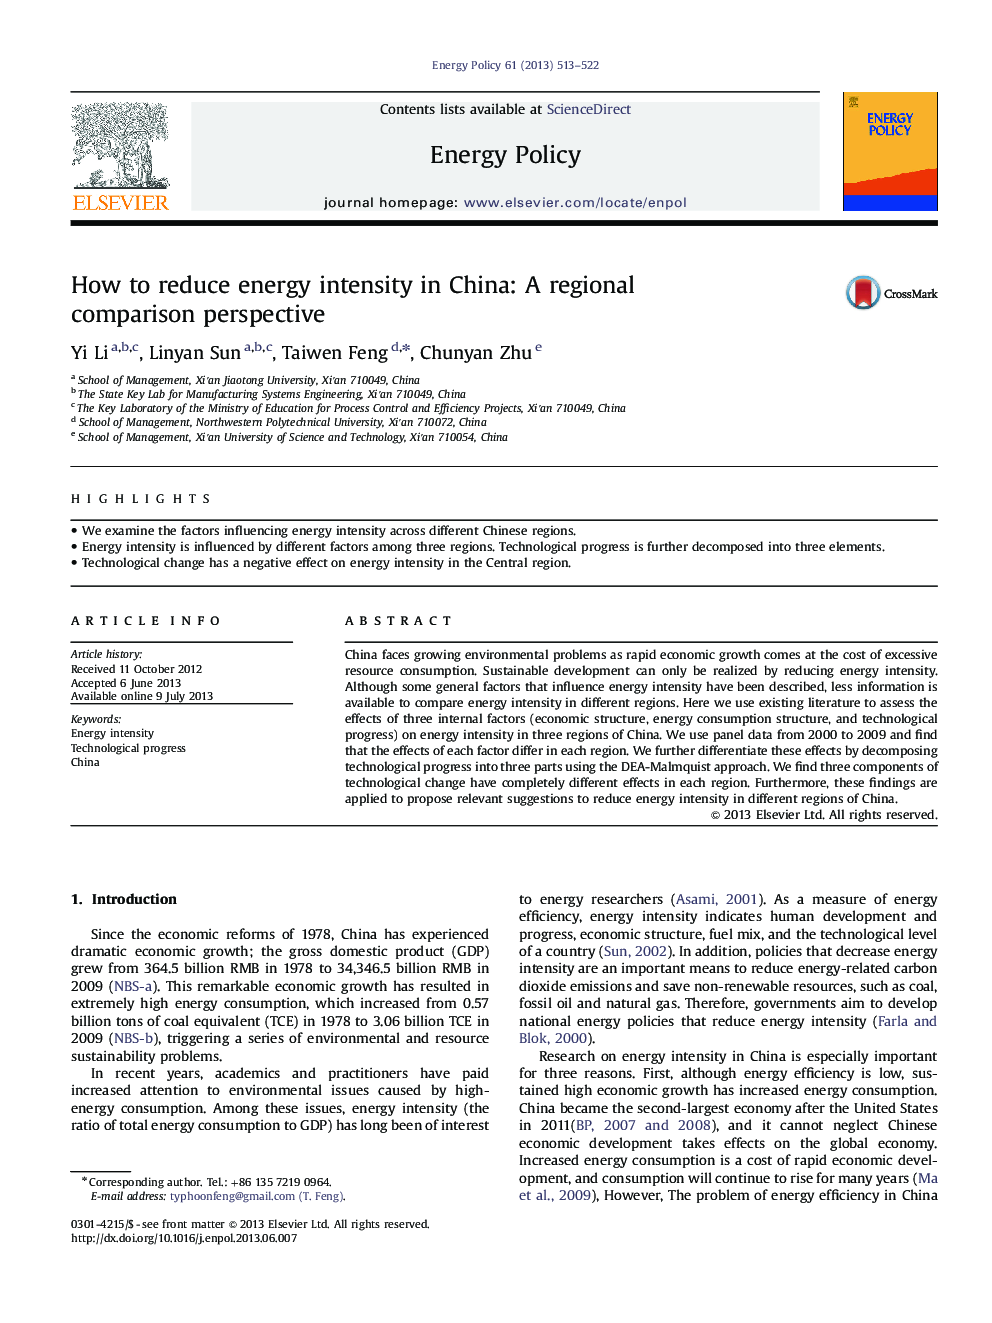 How to reduce energy intensity in China: A regional comparison perspective